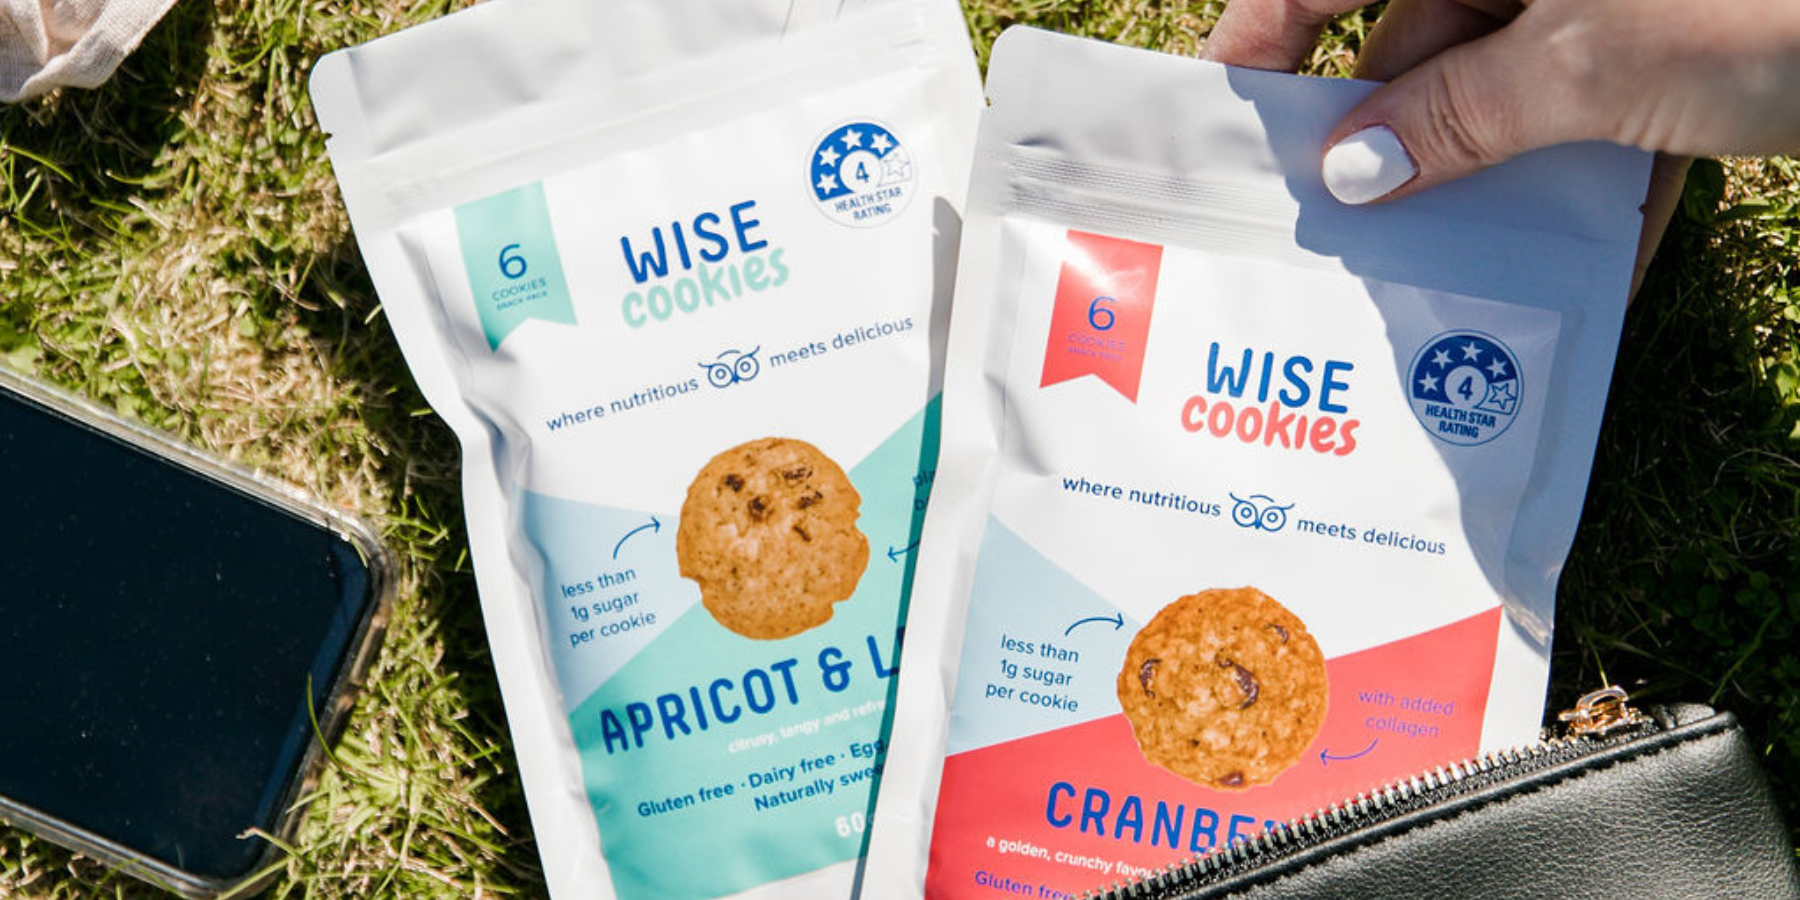 Wisefoods | Hand removing a Wise Cookie Cranberry Snack Pack from a black purse on the grass, with an Apricot Wise Cookie Snack Pack and a mobile phone in the background